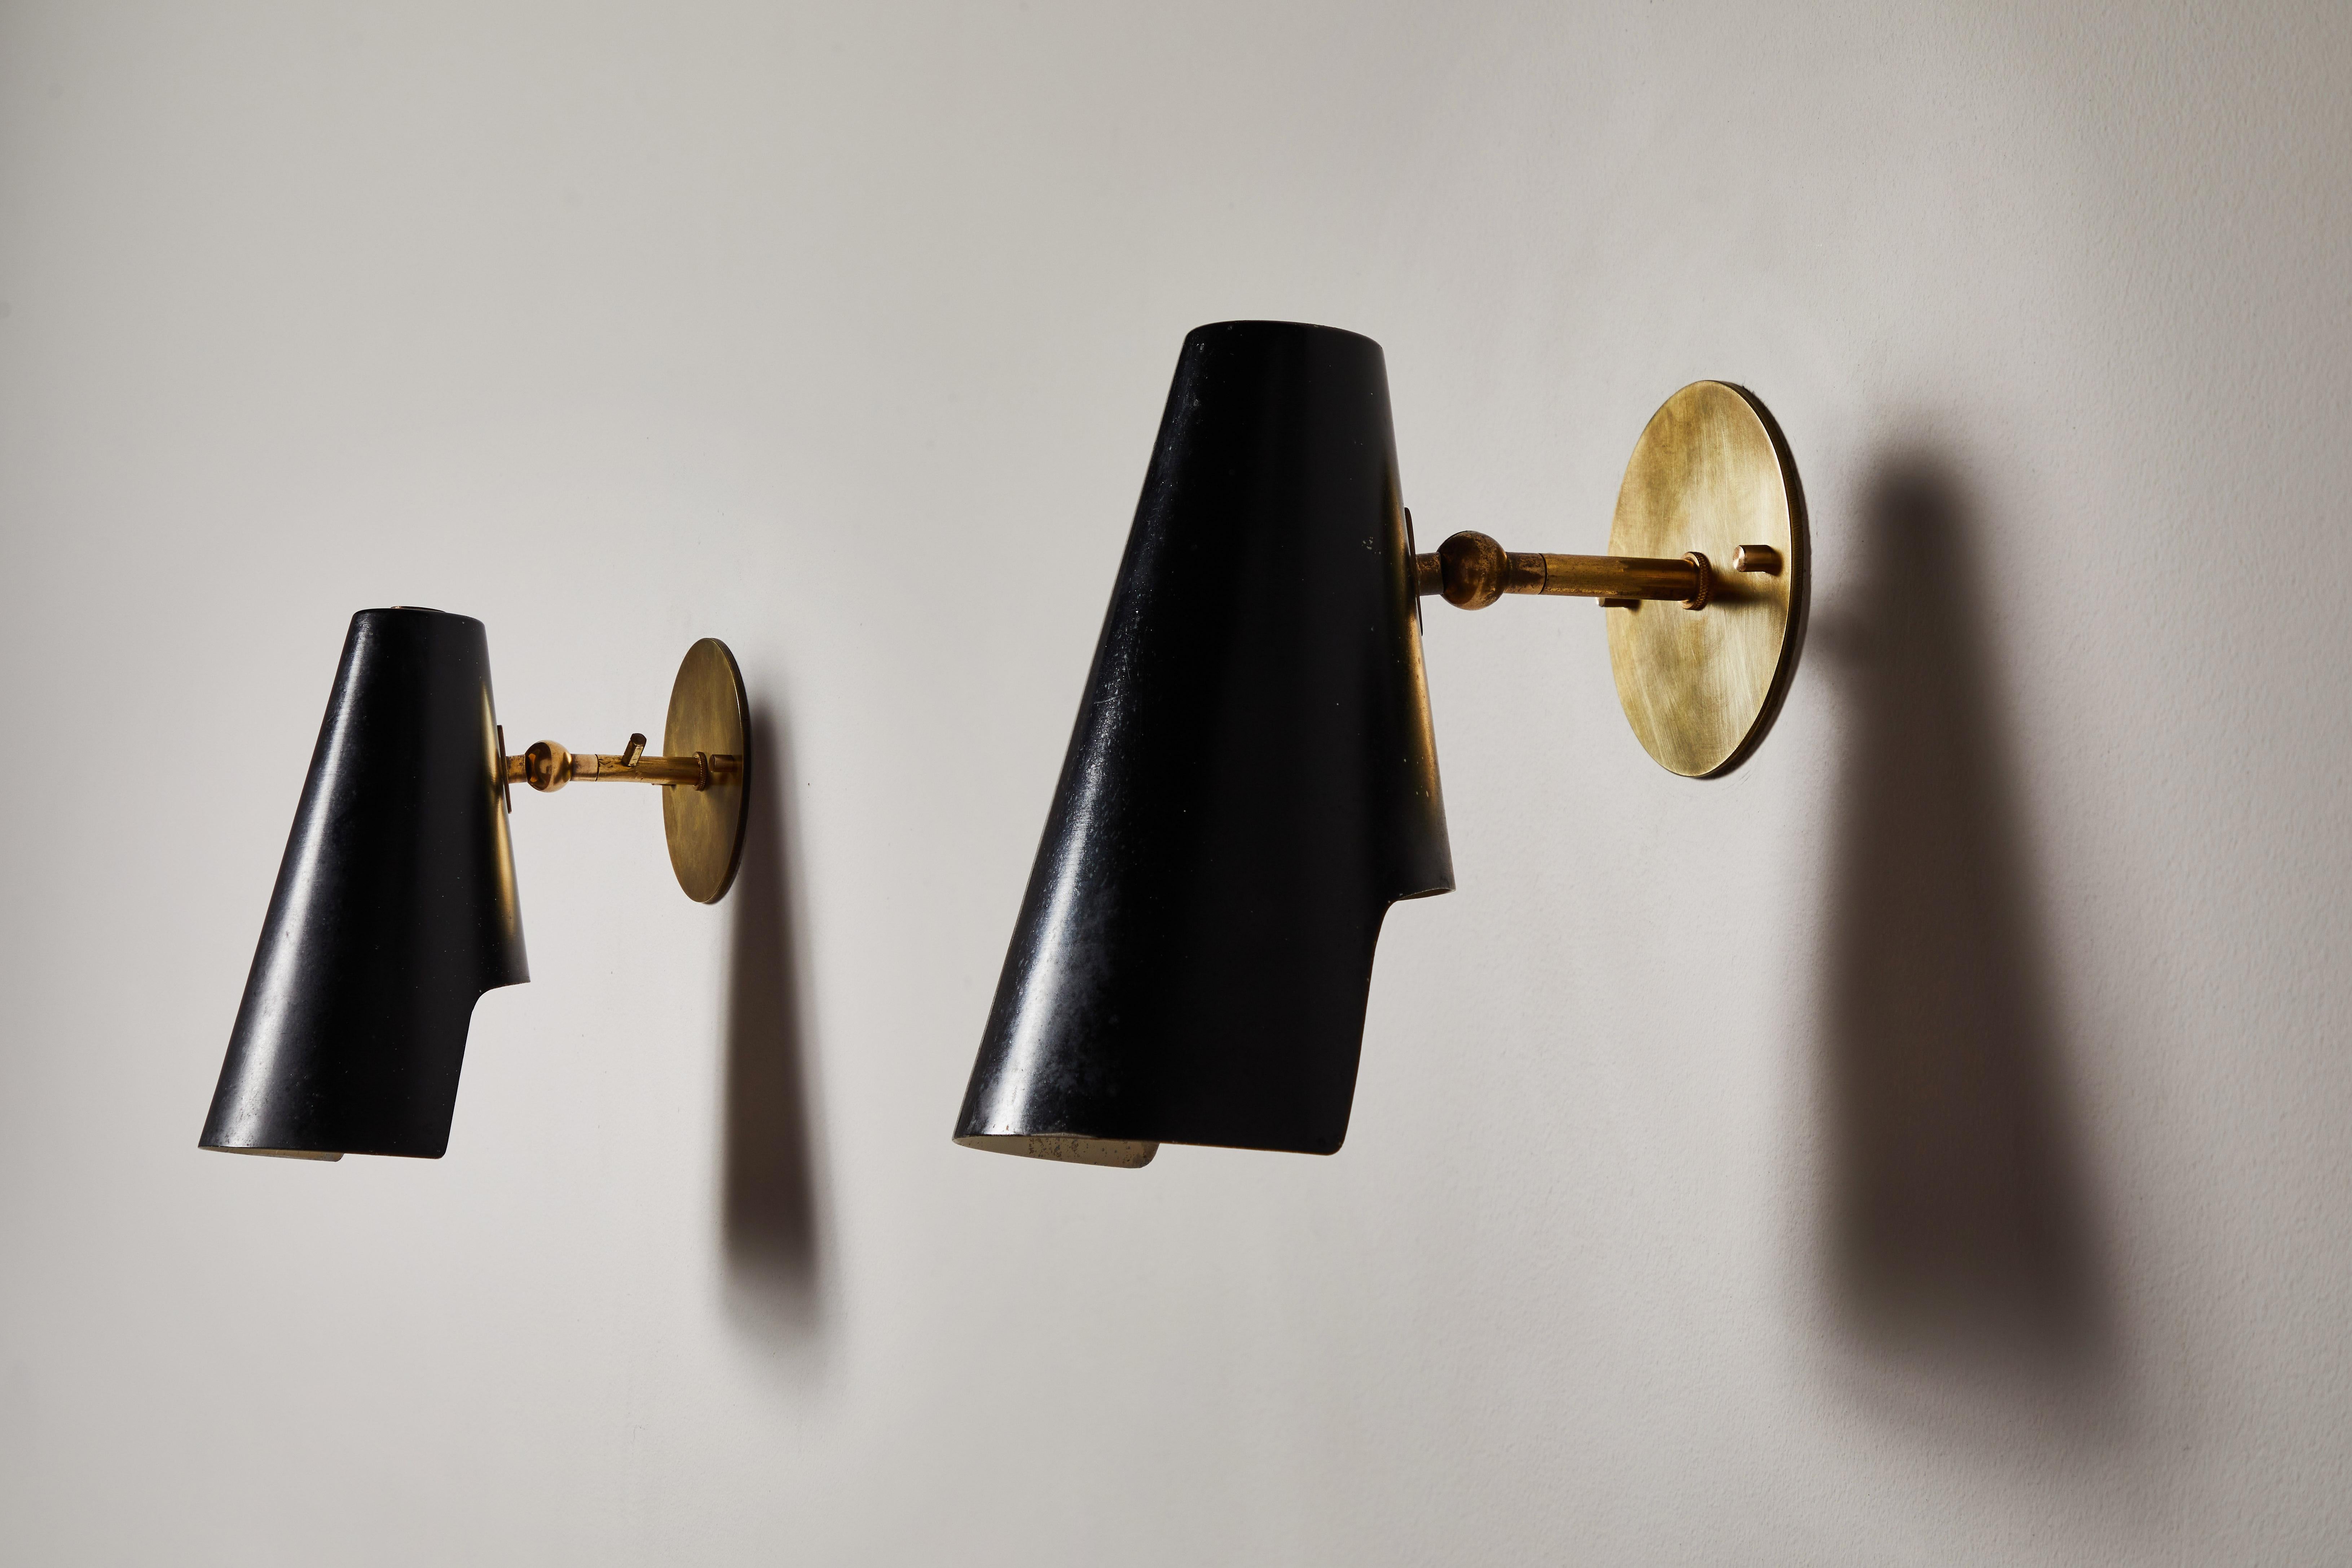 Pair of Sconces by Gino Sarfatti for Arteluce 1